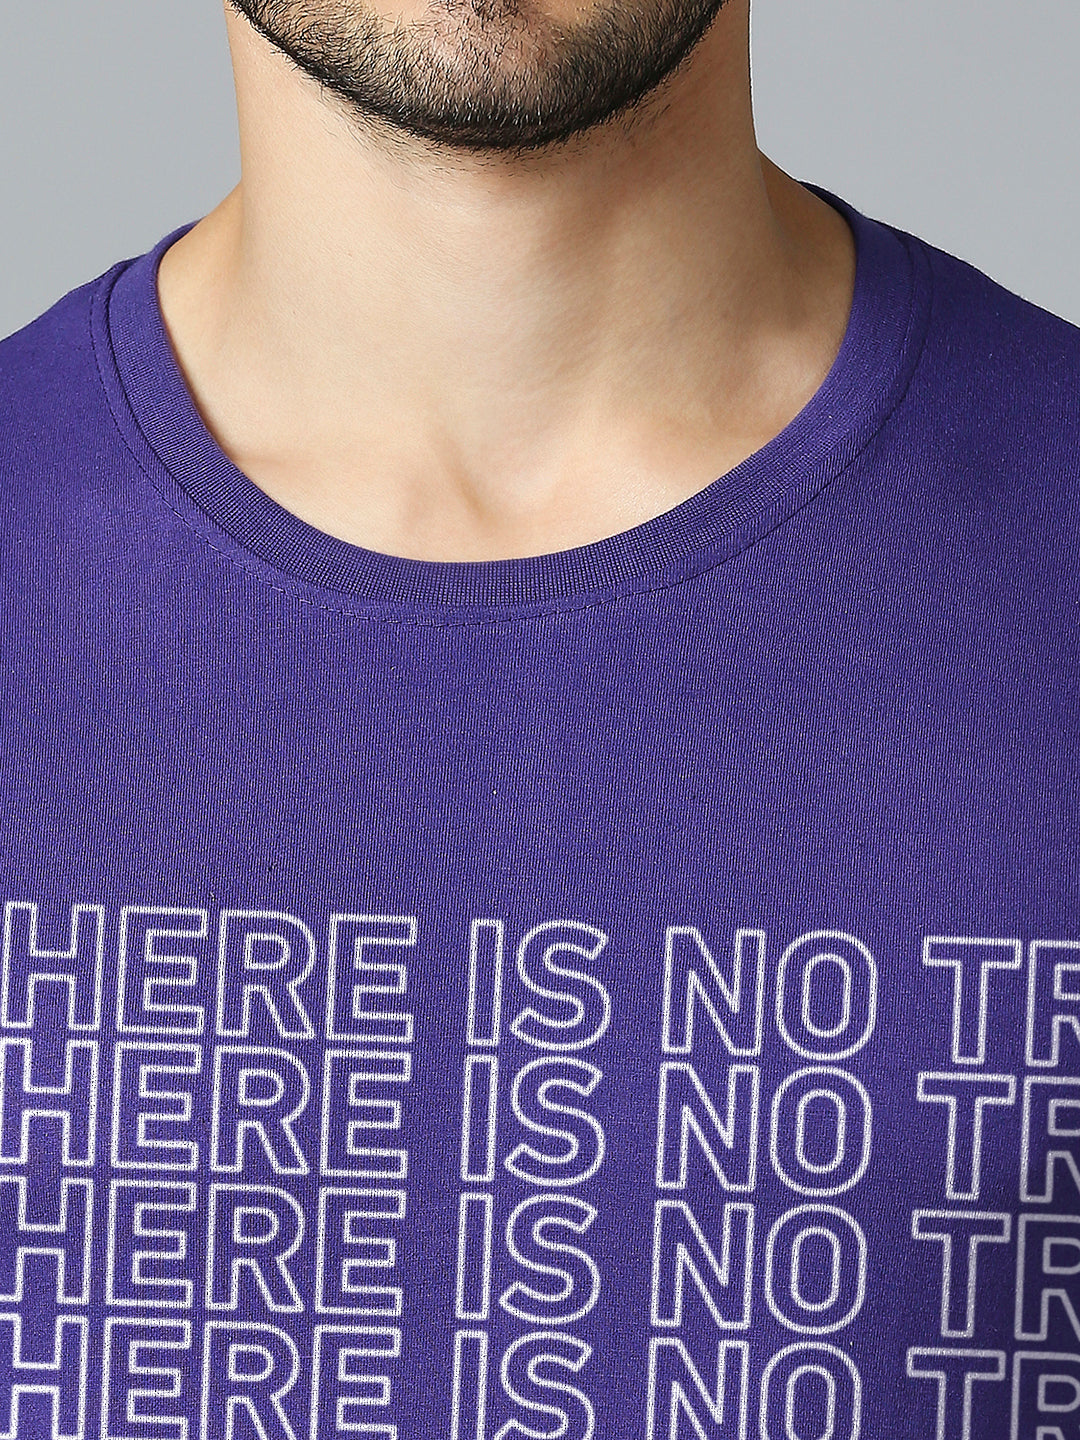 Do or do not, there is no try T-Shirt